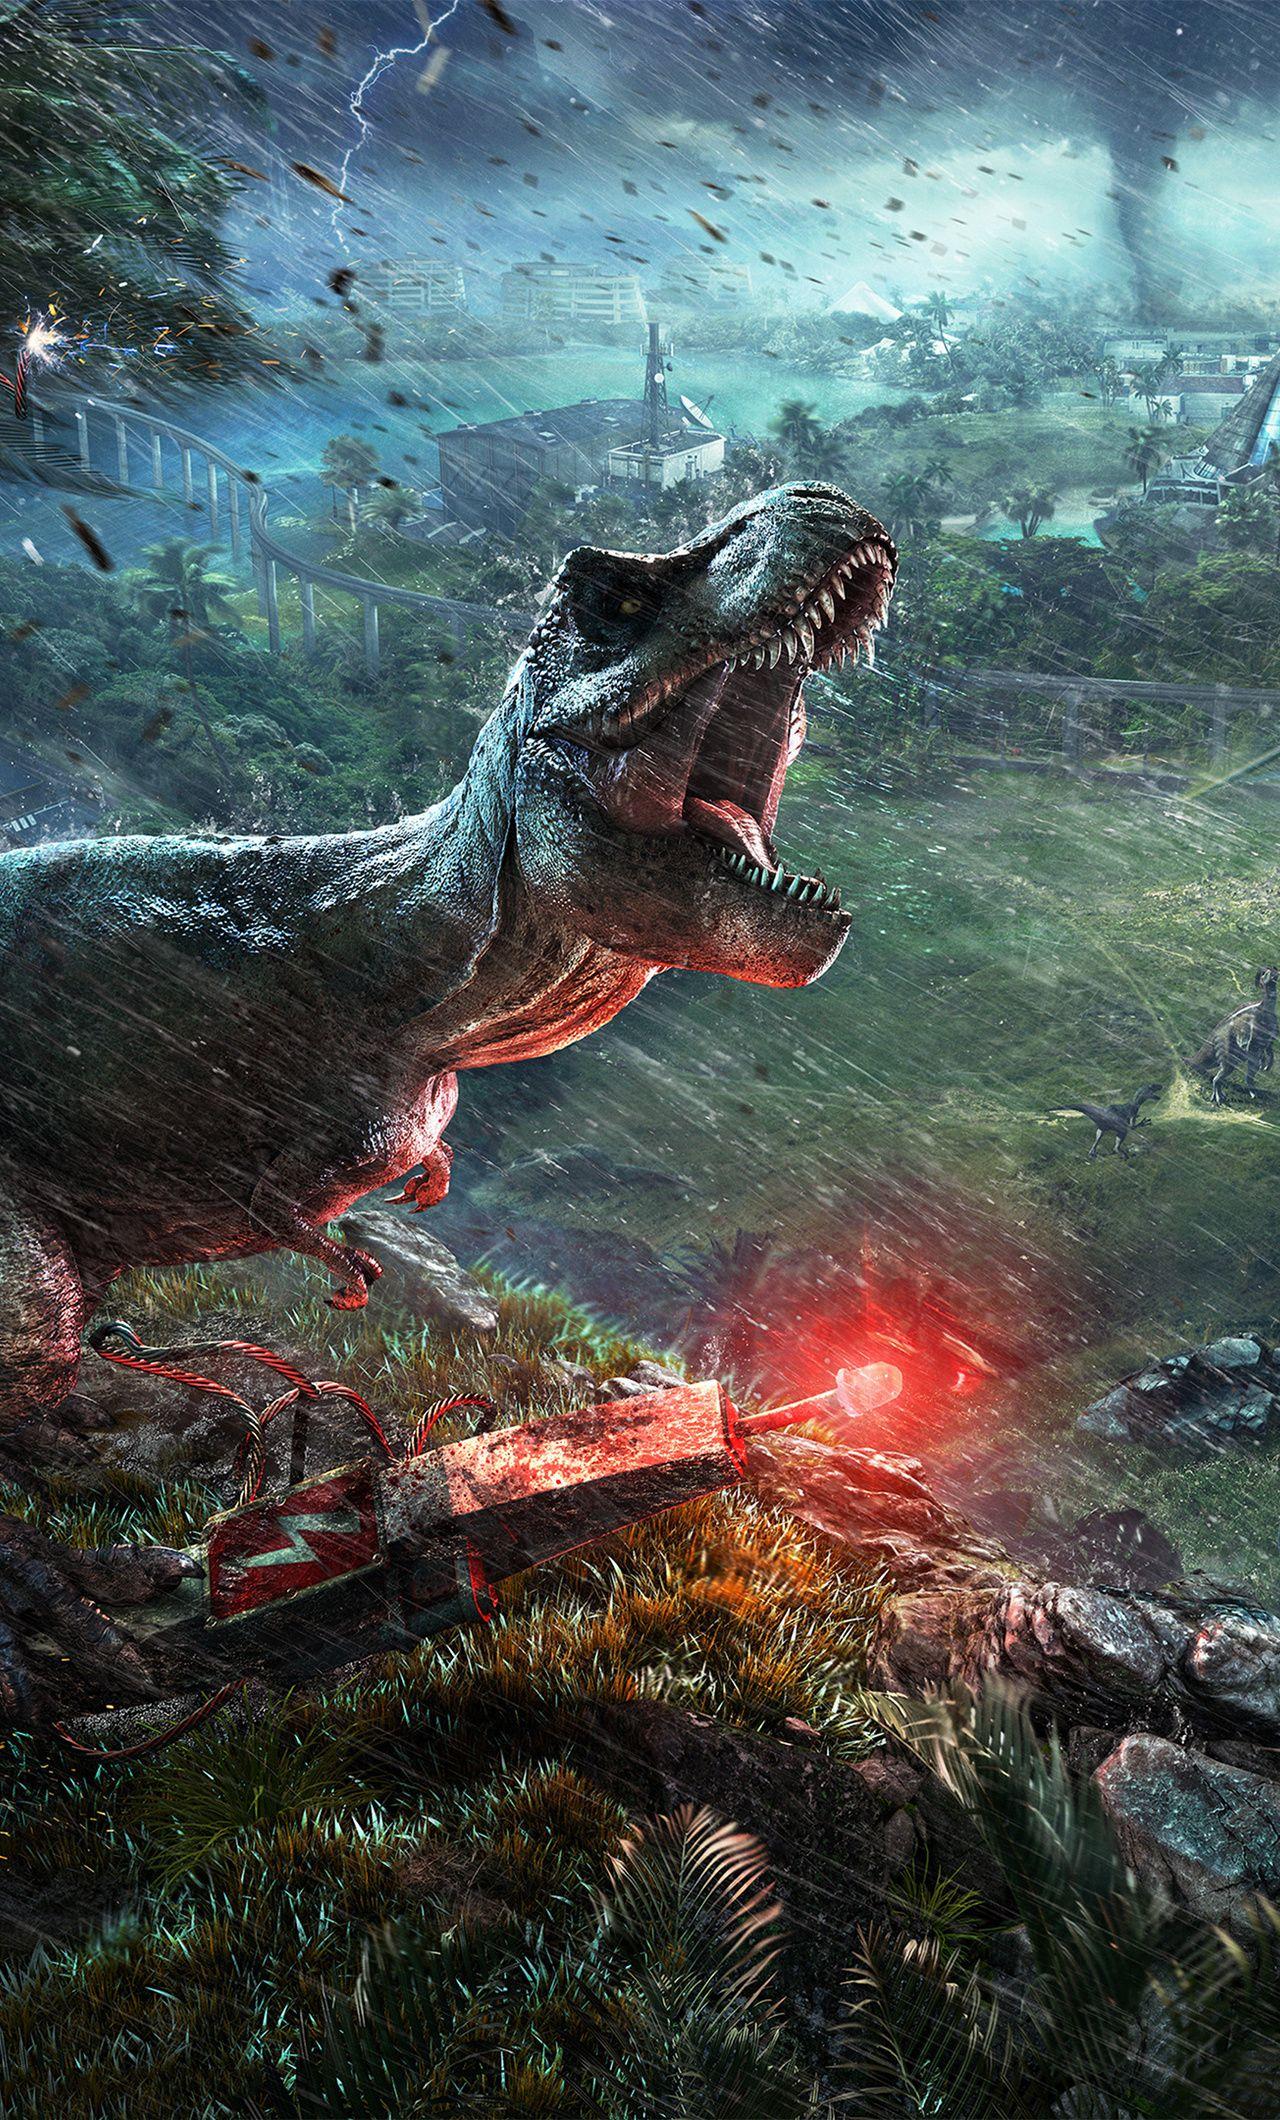 1125x2436 Jurassic World Camp Cretaceous Iphone XSIphone 10Iphone X HD 4k  Wallpapers Images Backgrounds Photos and Pictures